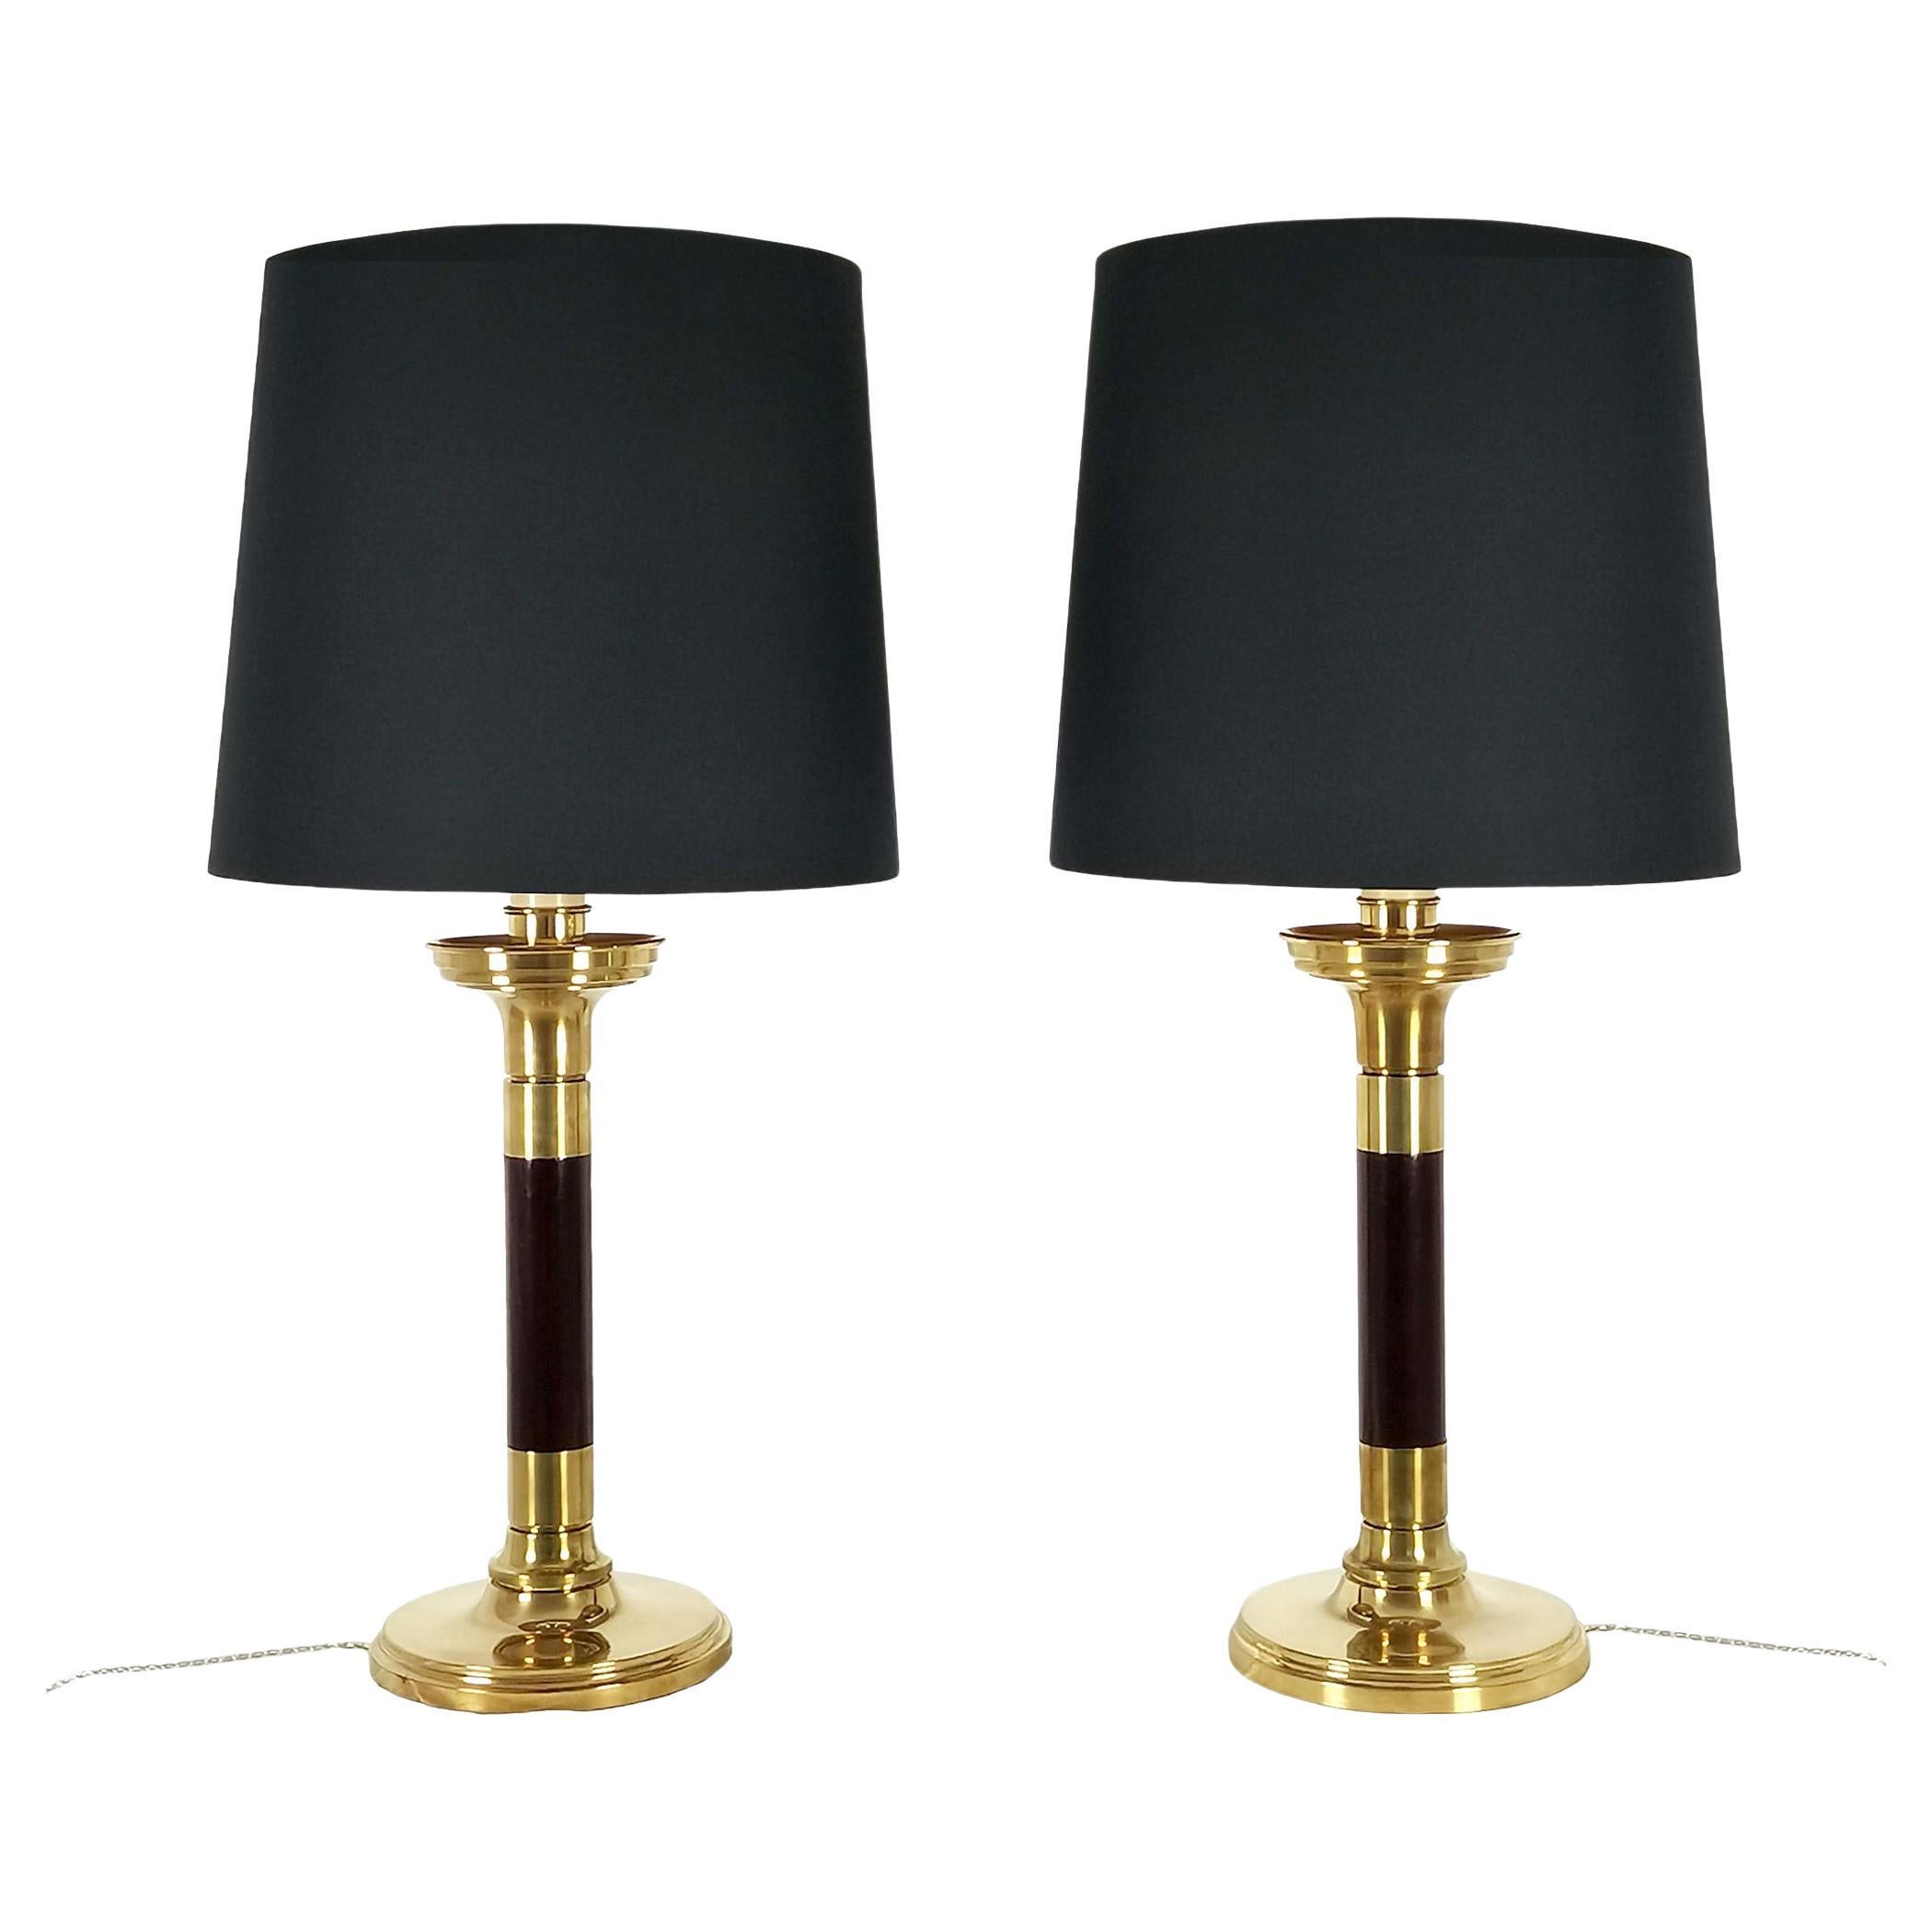 Pair of Mid-Century Modern Table Lamps by Clar, Mahogany and Brass - Barcelona For Sale